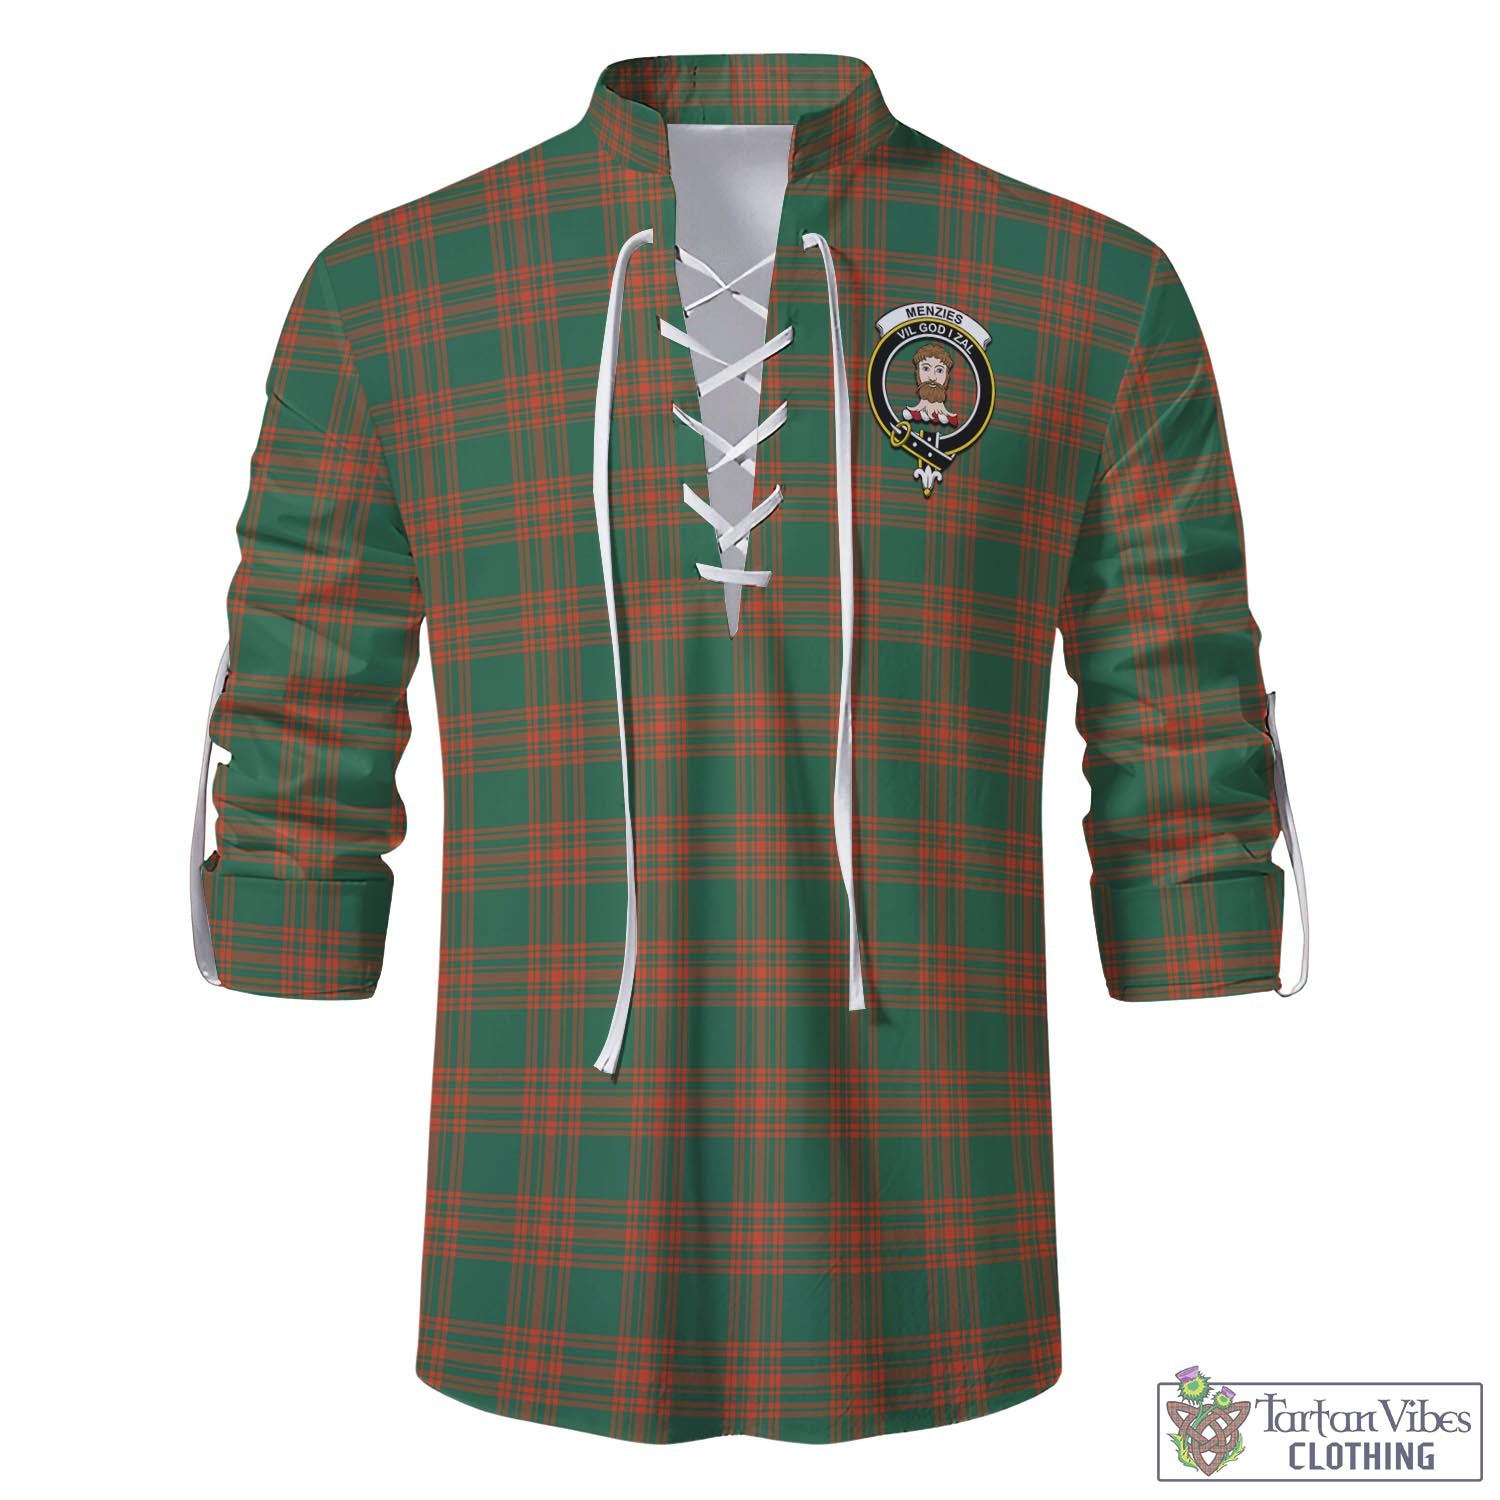 Tartan Vibes Clothing Menzies Green Ancient Tartan Men's Scottish Traditional Jacobite Ghillie Kilt Shirt with Family Crest